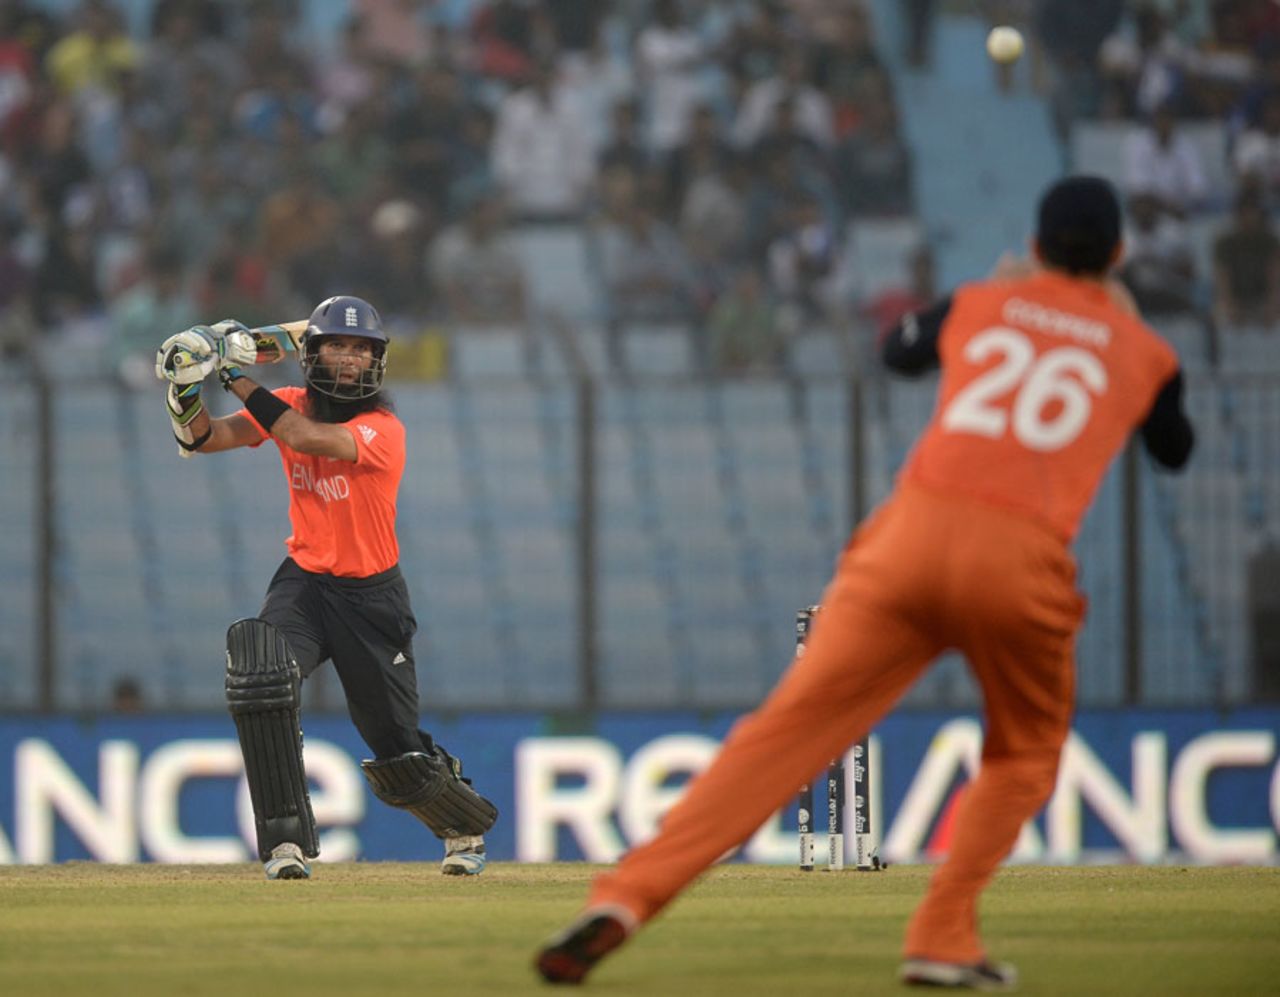 Moeen Ali cannot believe he has picked out Tom Cooper at cover, England v Netherlands, World T20, Group 1, Chittagong, March 31, 2014